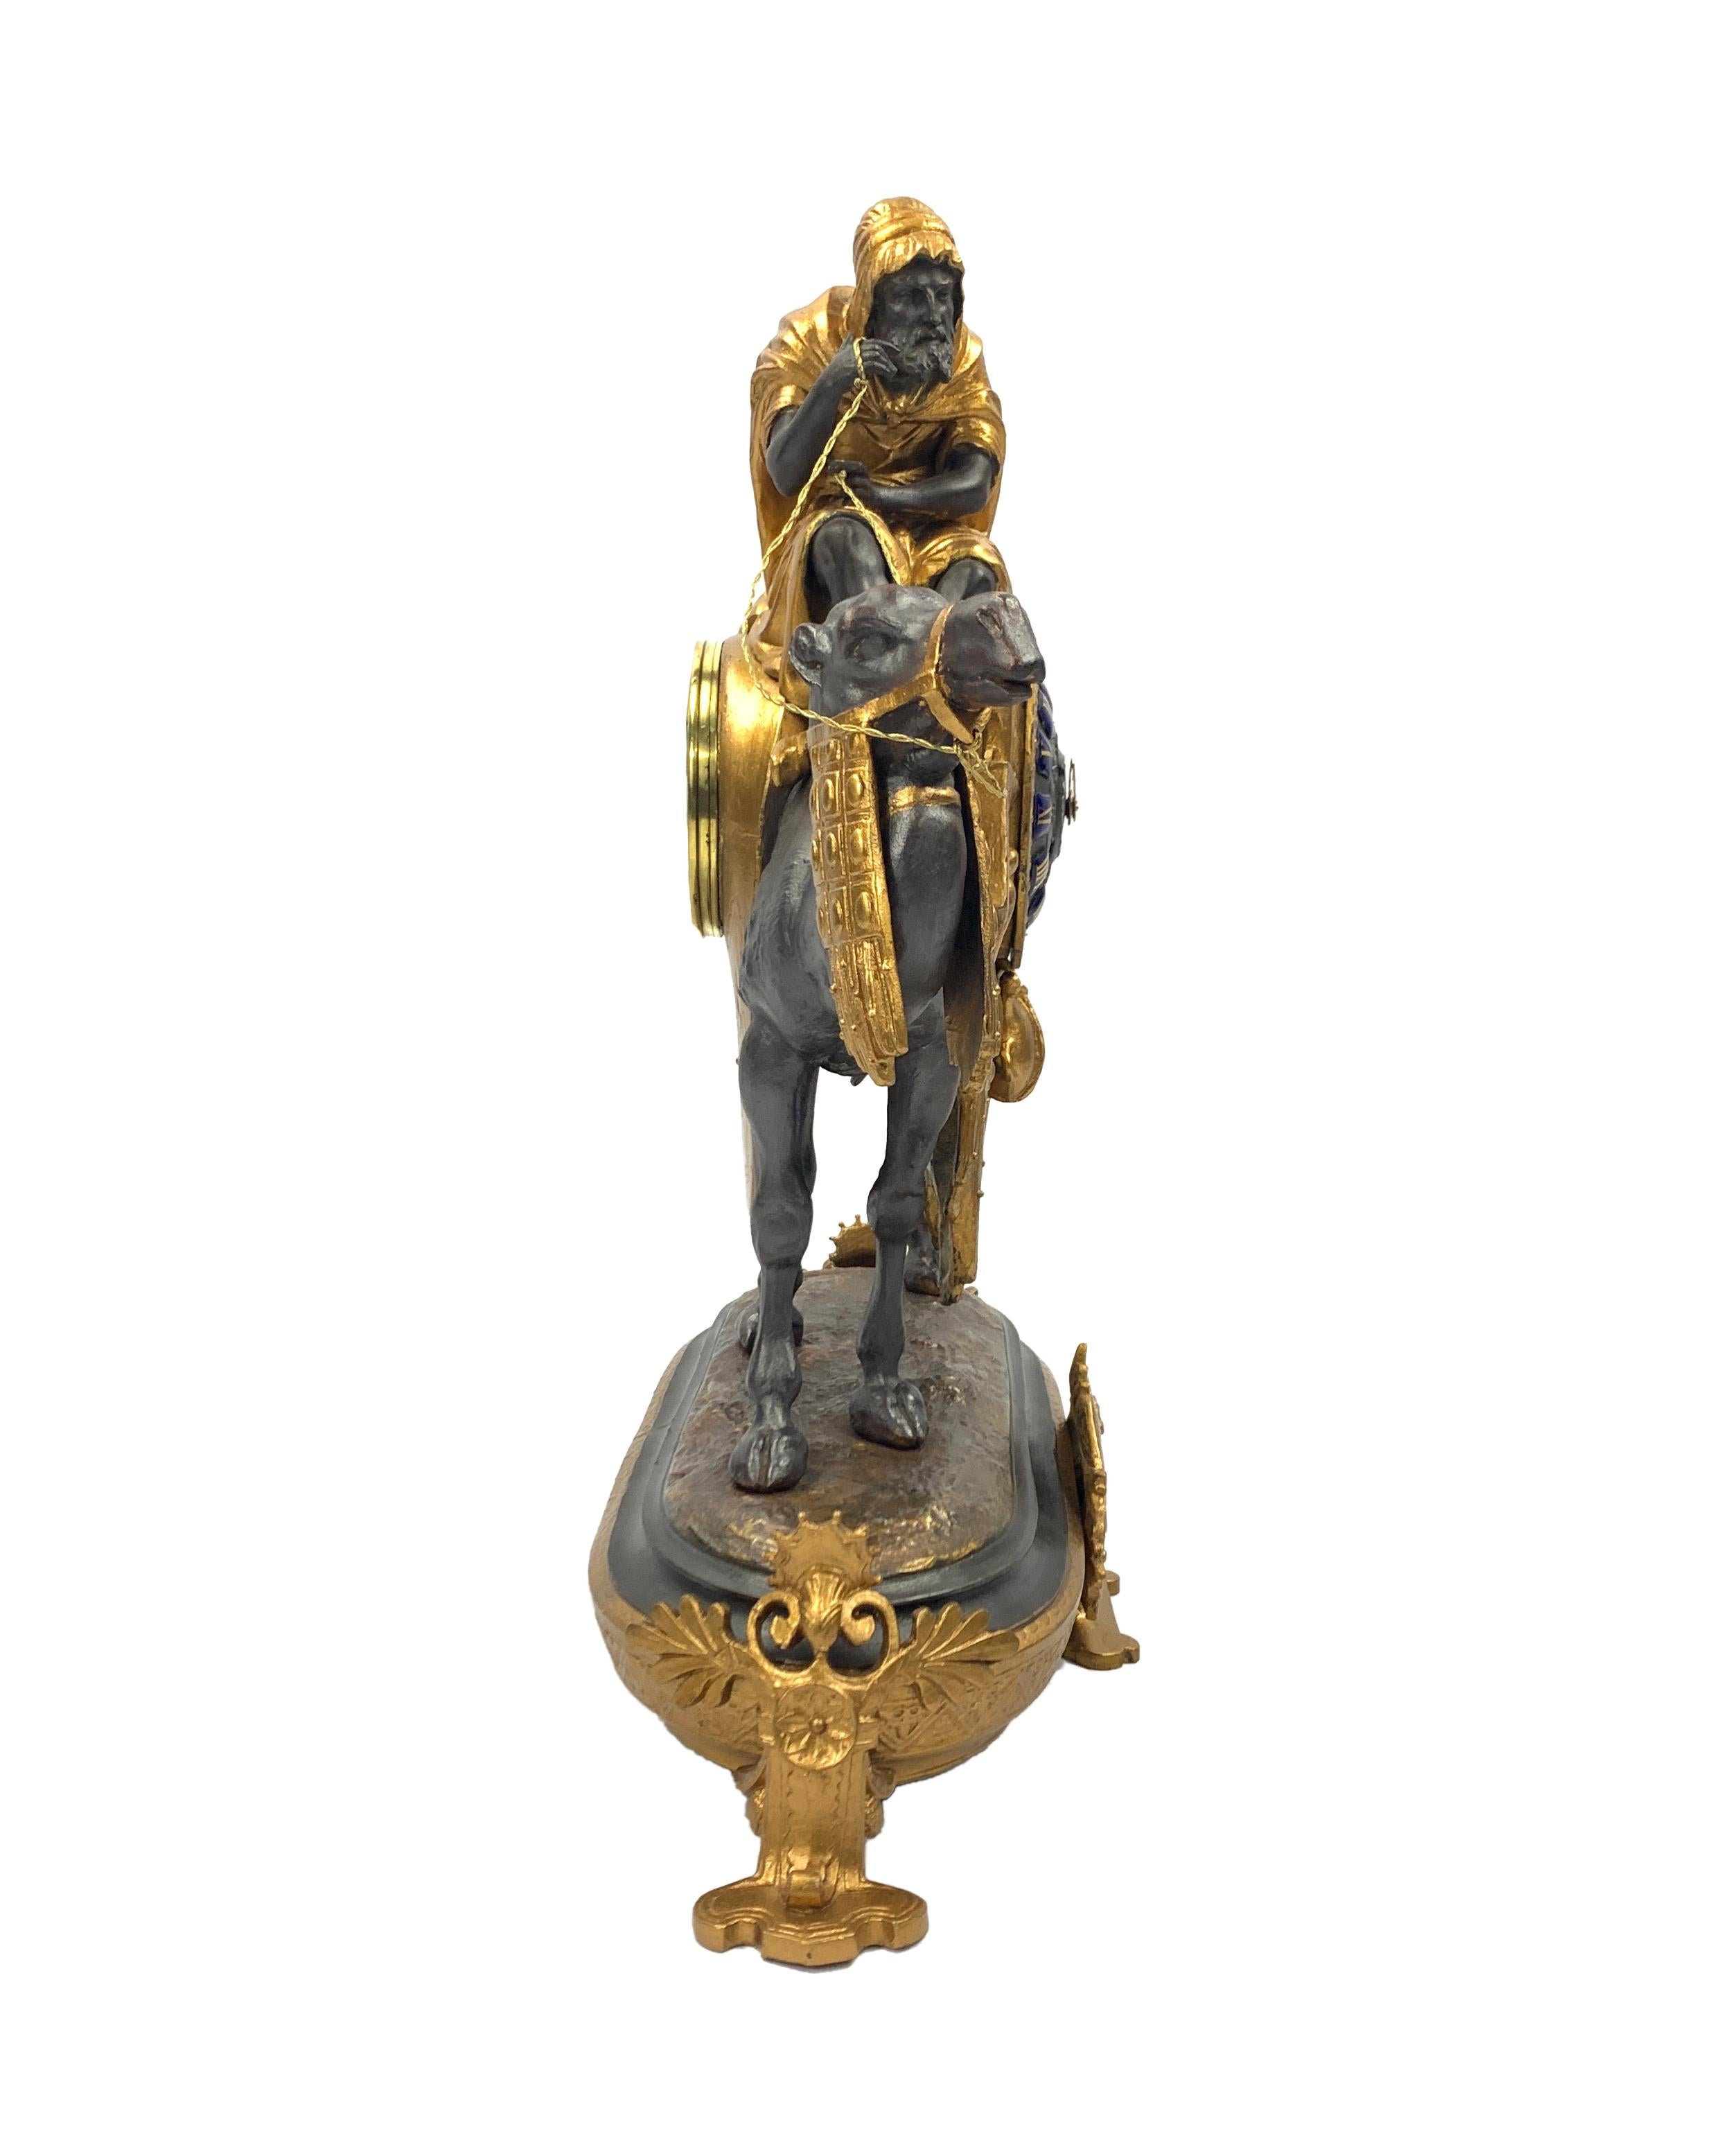 19th century French camel figural mantle clock, Cold painted Spelter figurine of a camel and Arab rider/keeper (Meharis).
 